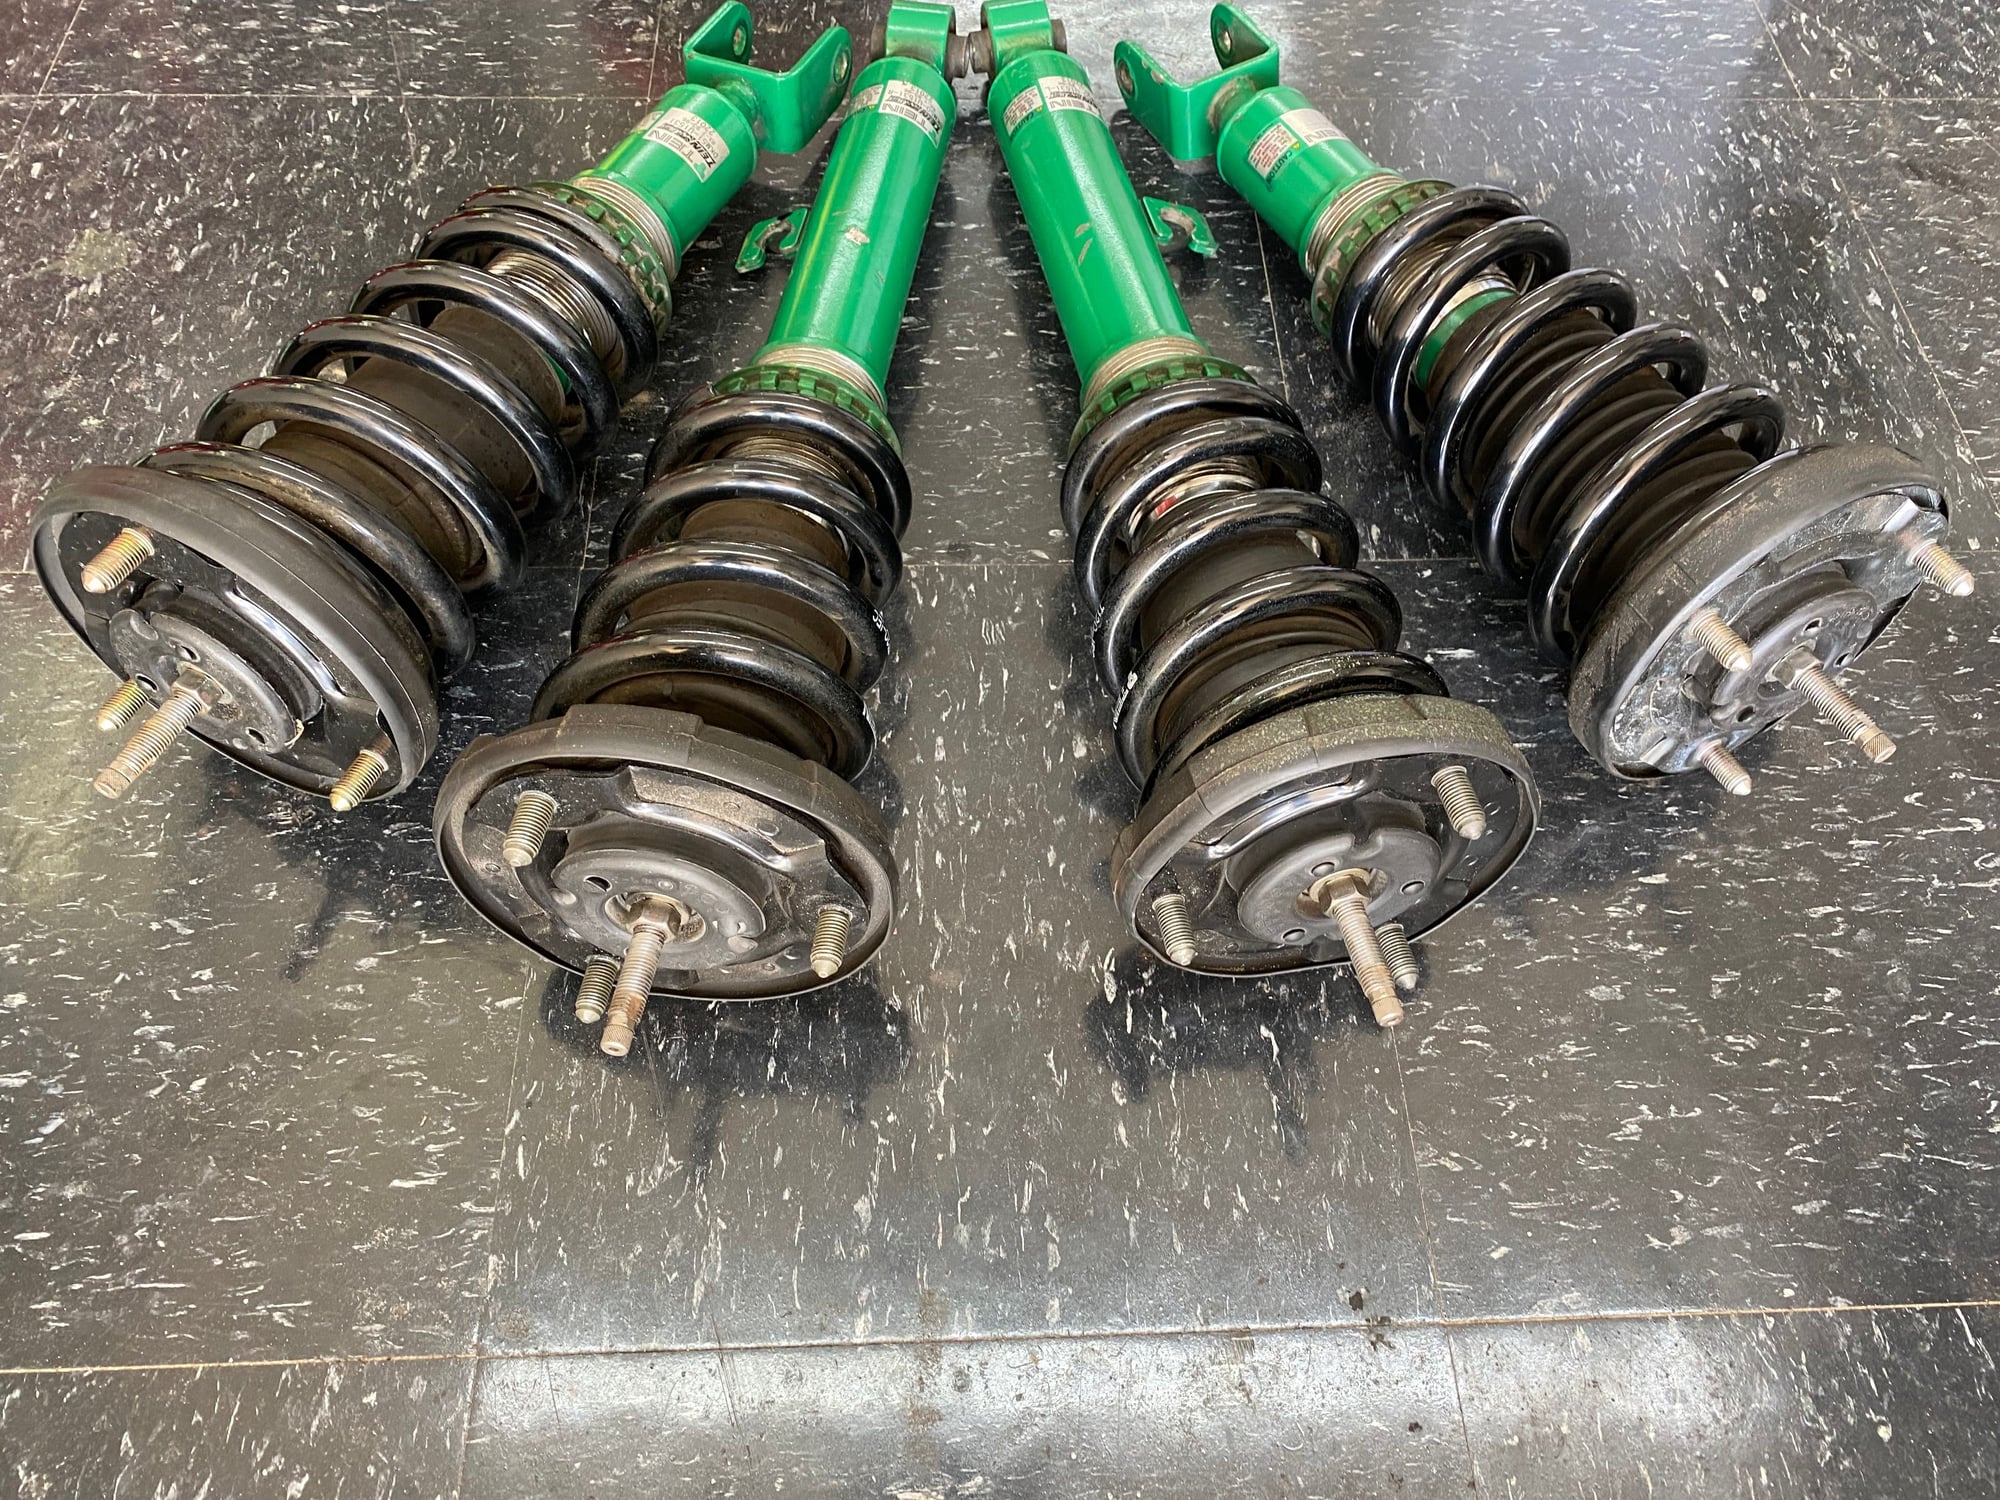 Steering/Suspension - Tein FD Super Street Coilovers, clean and nice - Used - 1993 to 2002 Mazda RX-7 - Pensacola, FL 32504, United States